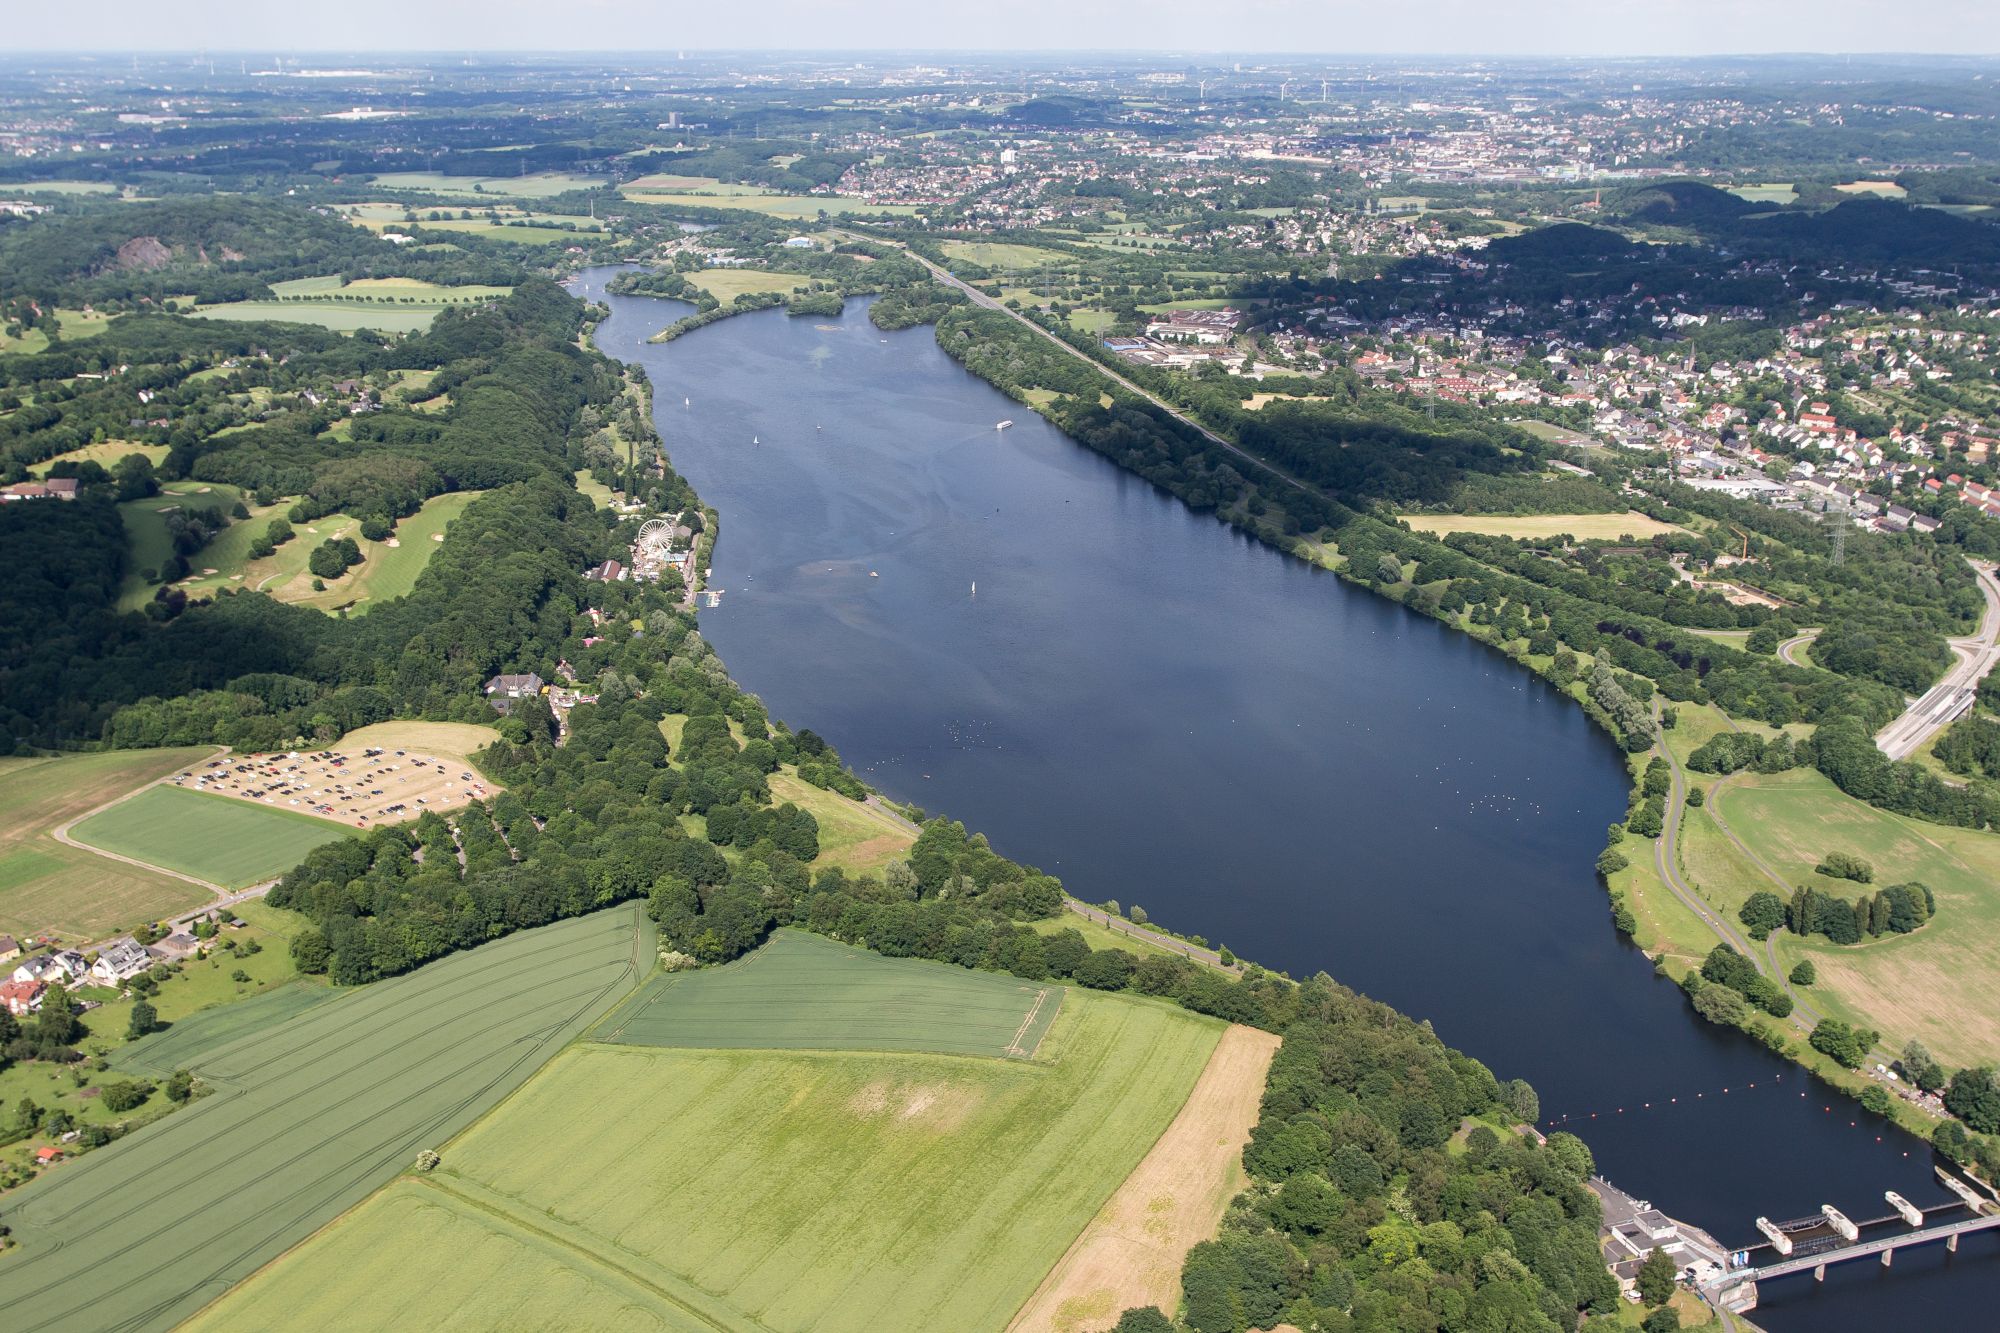 View of the Ruhr from above